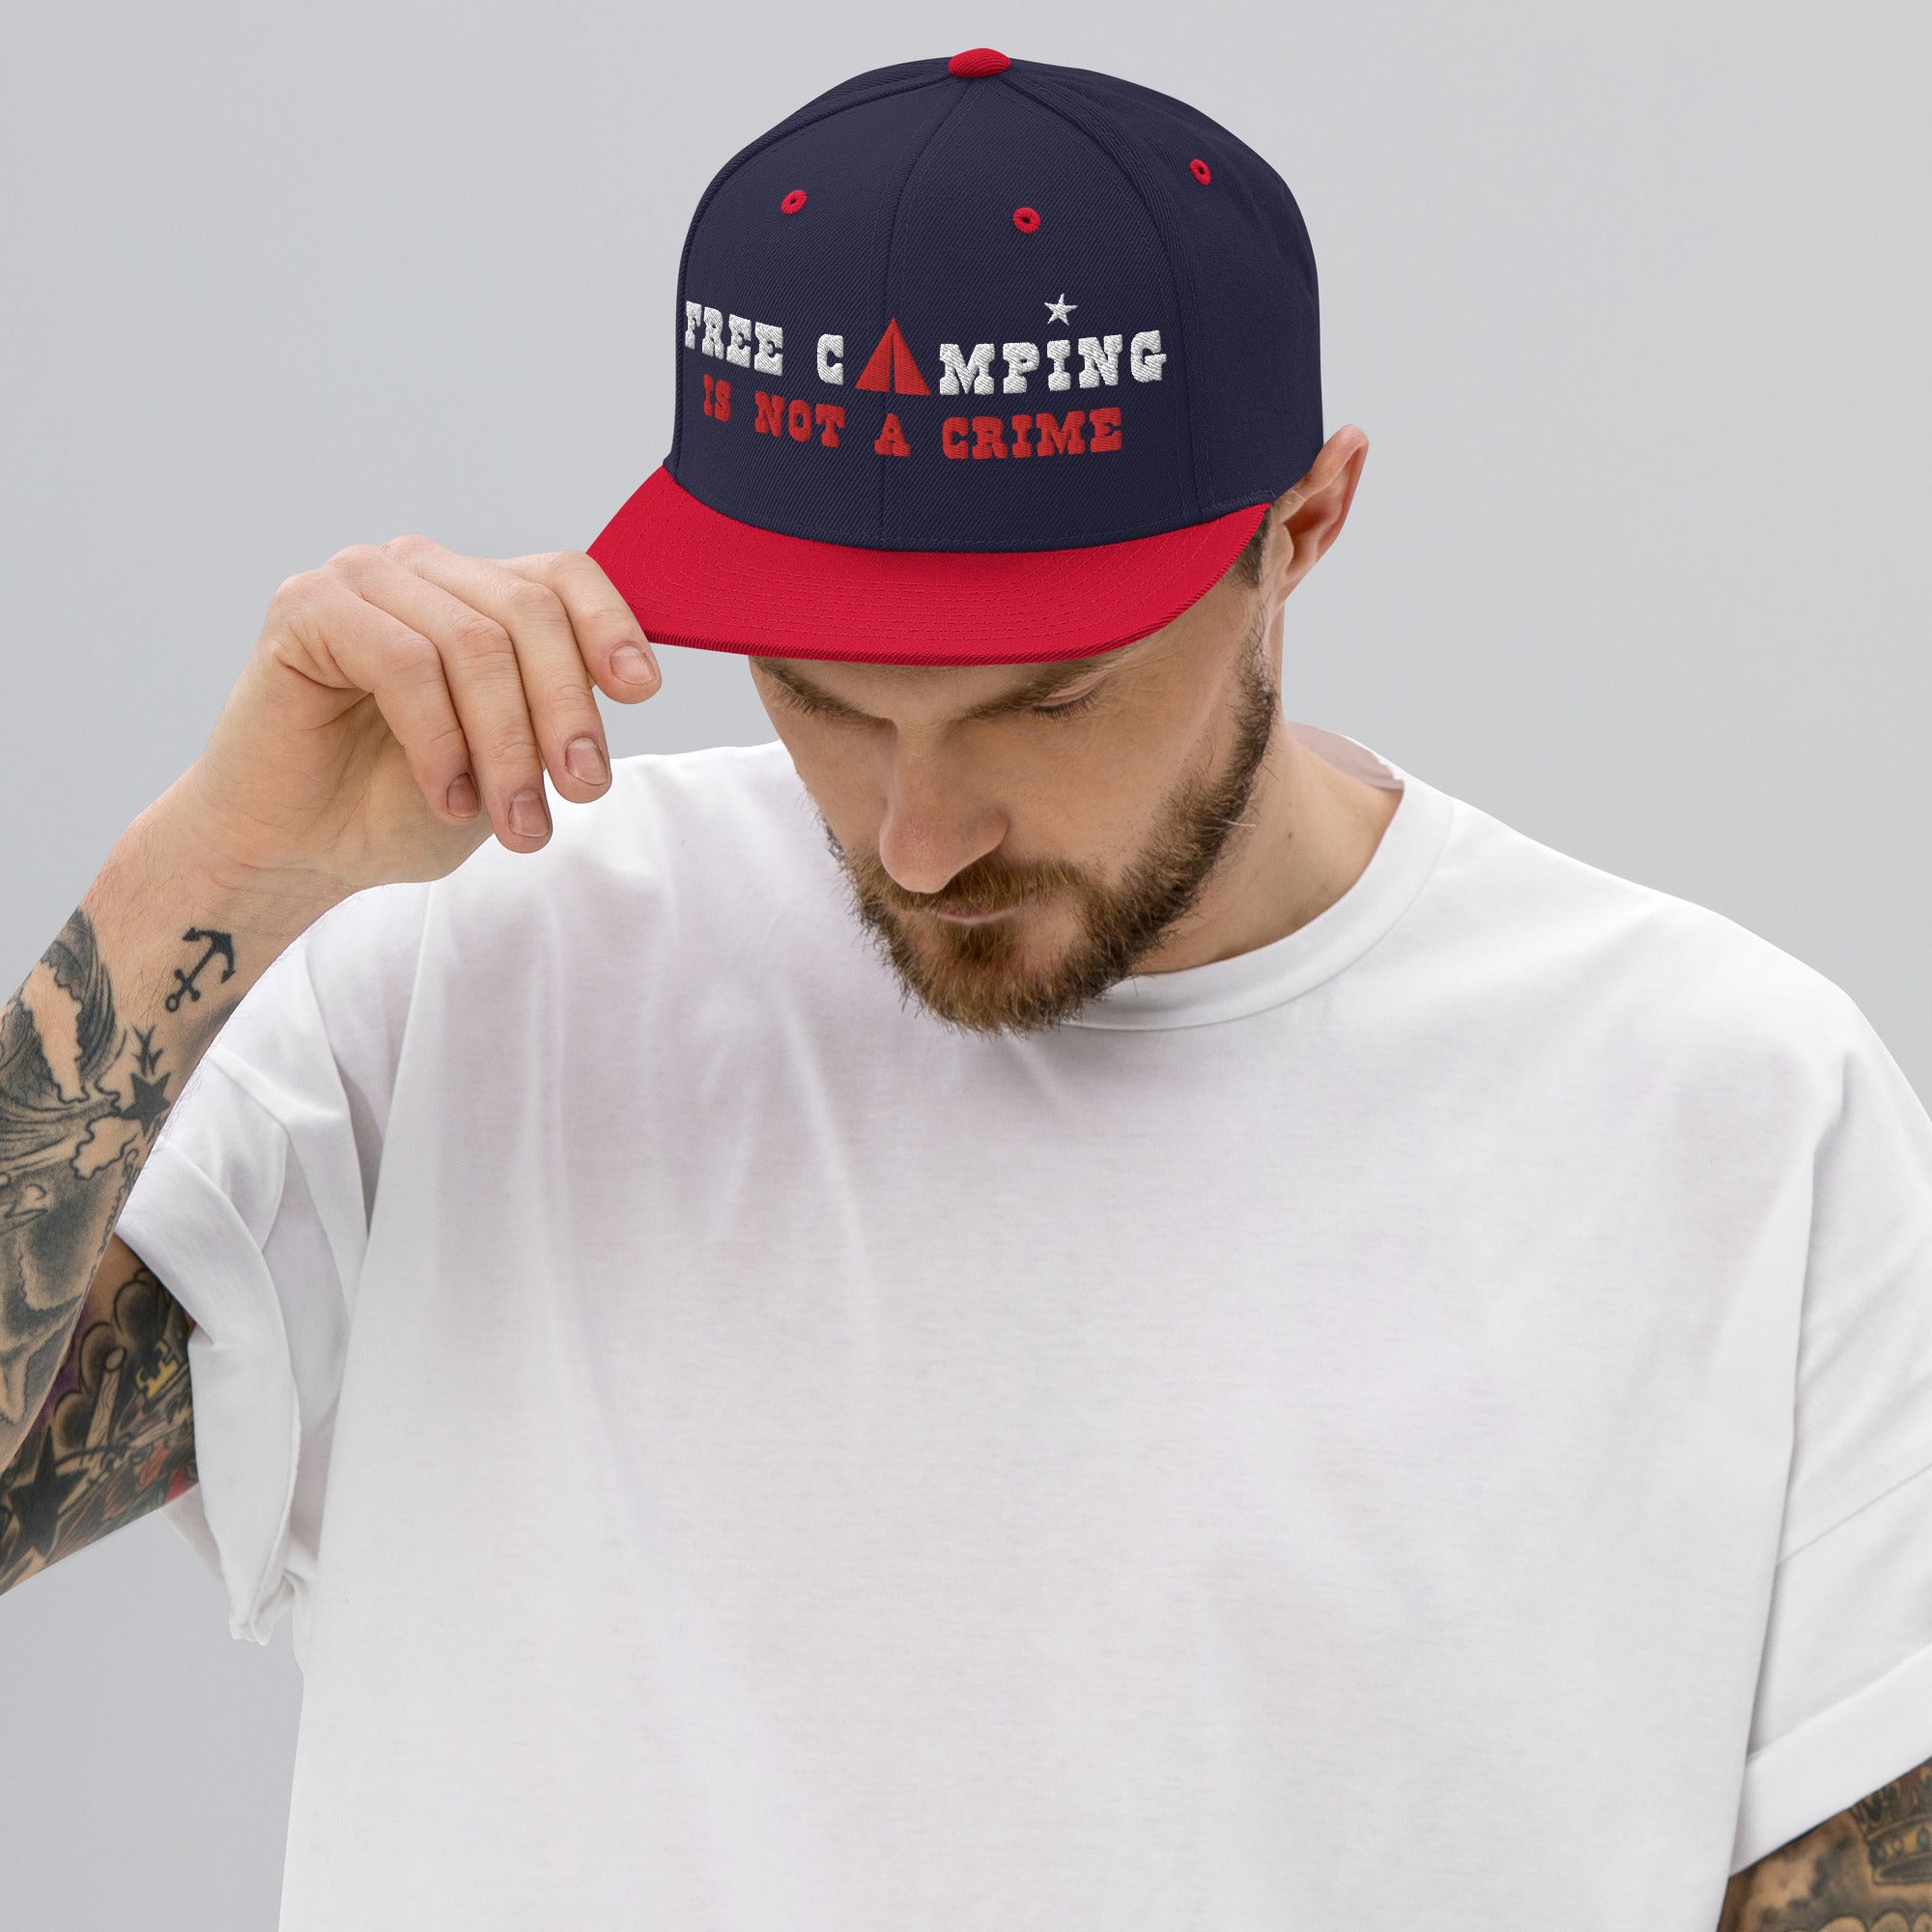 Two-Tone Snapback Wool Blend Cap Free camping is not a crime white/red